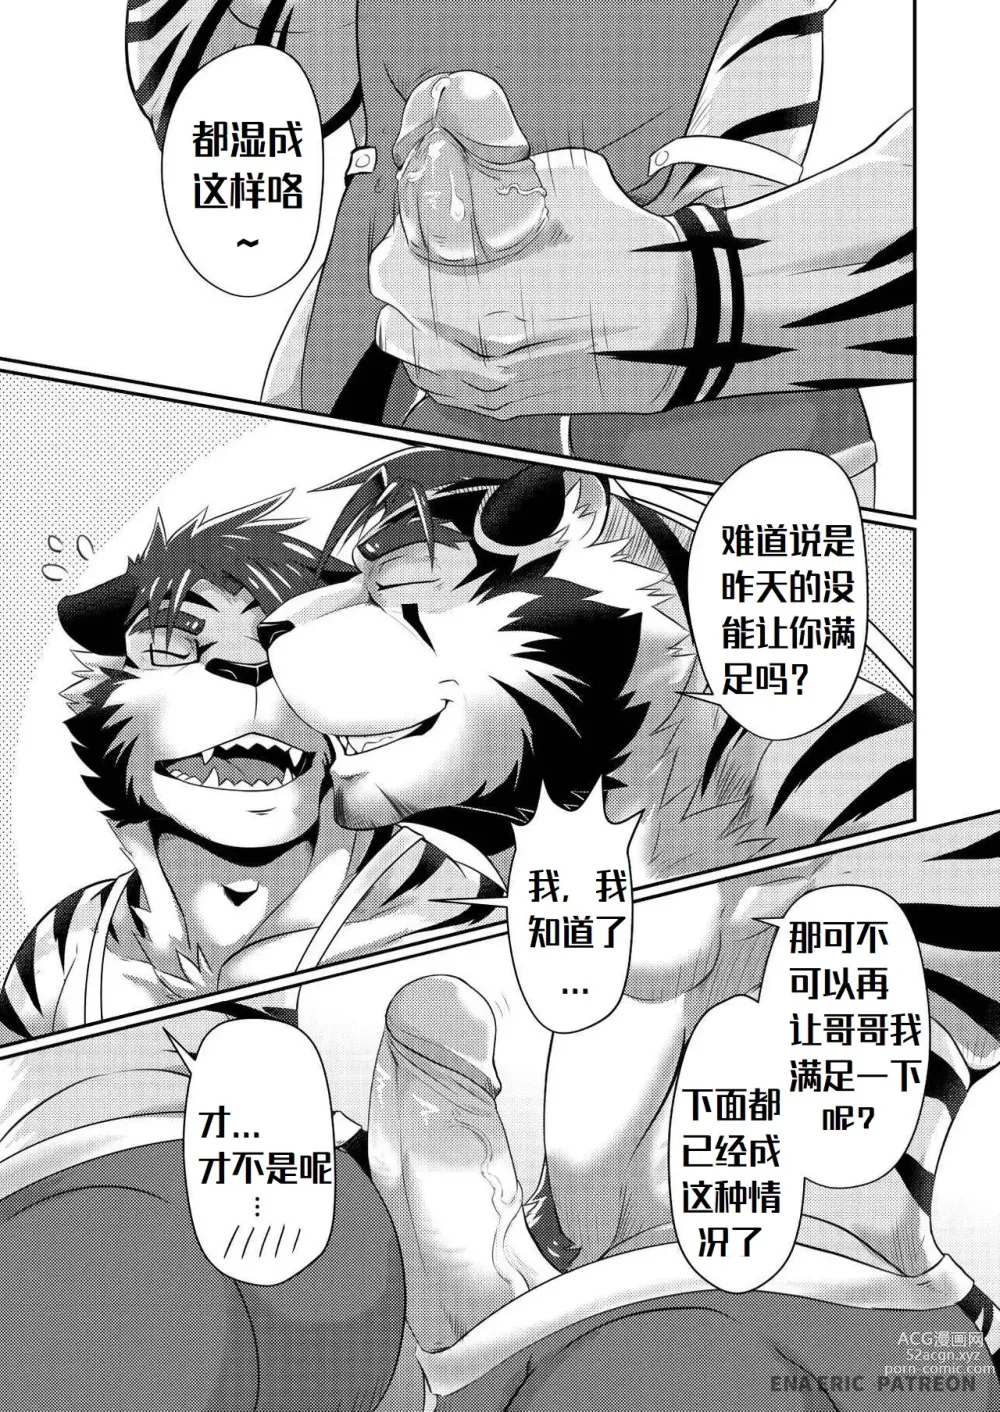 Page 7 of doujinshi 兄弟的秘密